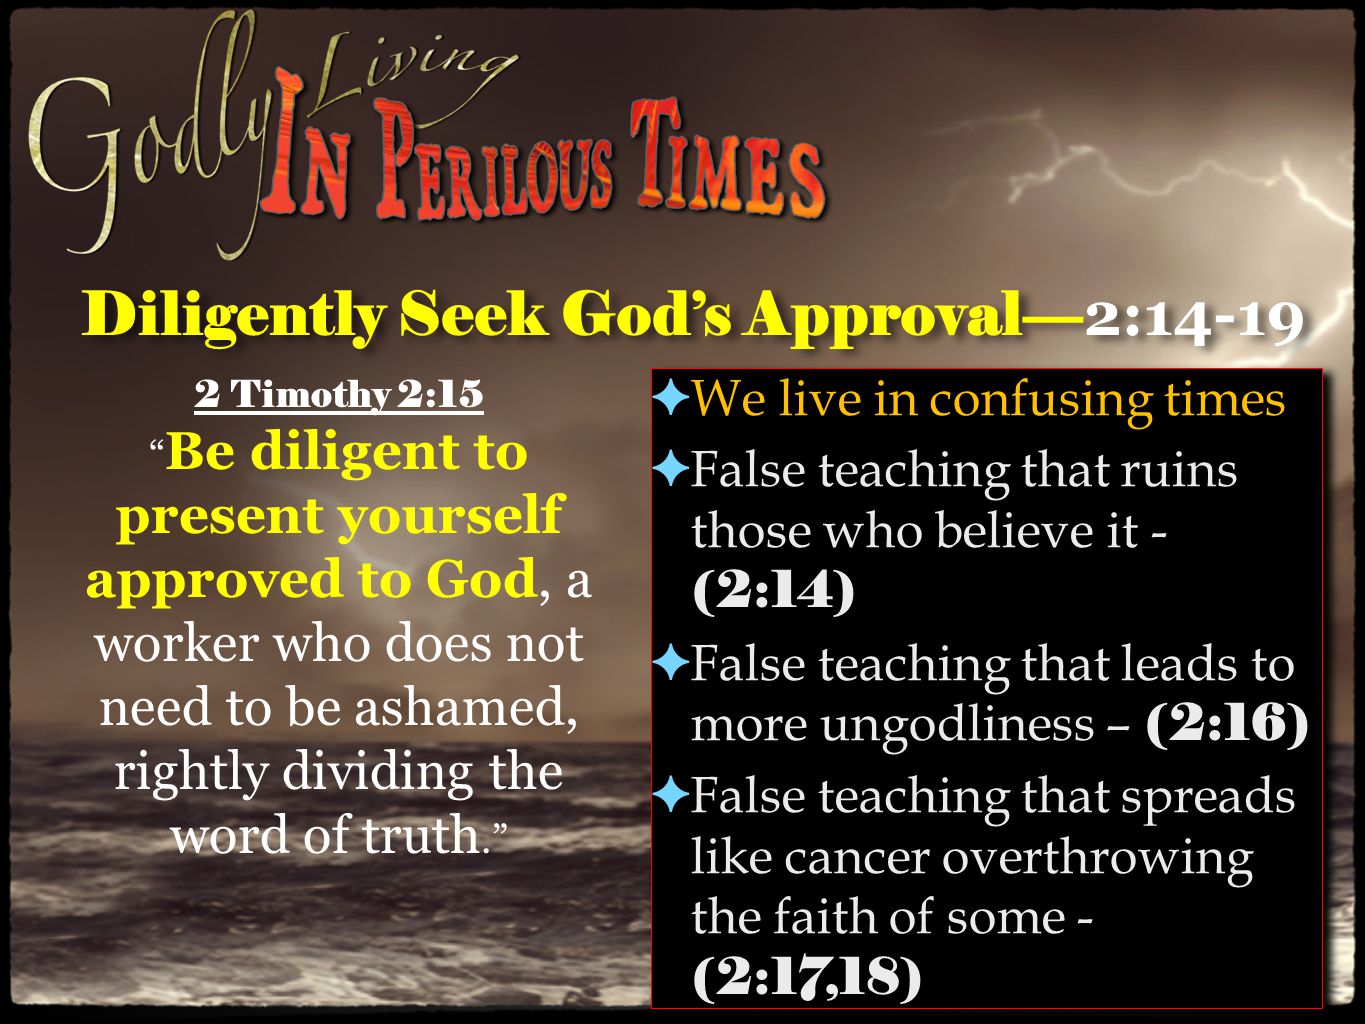 Diligently Seek God’s Approval— 2:14-19 ✦ We live in confusing times ✦ False teaching that ruins those who believe it - (2:14) ✦ False teaching that leads to more ungodliness – (2:16) ✦ False teaching that spreads like cancer overthrowing the faith of some - (2:17,18) ✦ We live in confusing times ✦ False teaching that ruins those who believe it - (2:14) ✦ False teaching that leads to more ungodliness – (2:16) ✦ False teaching that spreads like cancer overthrowing the faith of some - (2:17,18) 2 Timothy 2:15 Be diligent to present yourself approved to God, a worker who does not need to be ashamed, rightly dividing the word of truth.